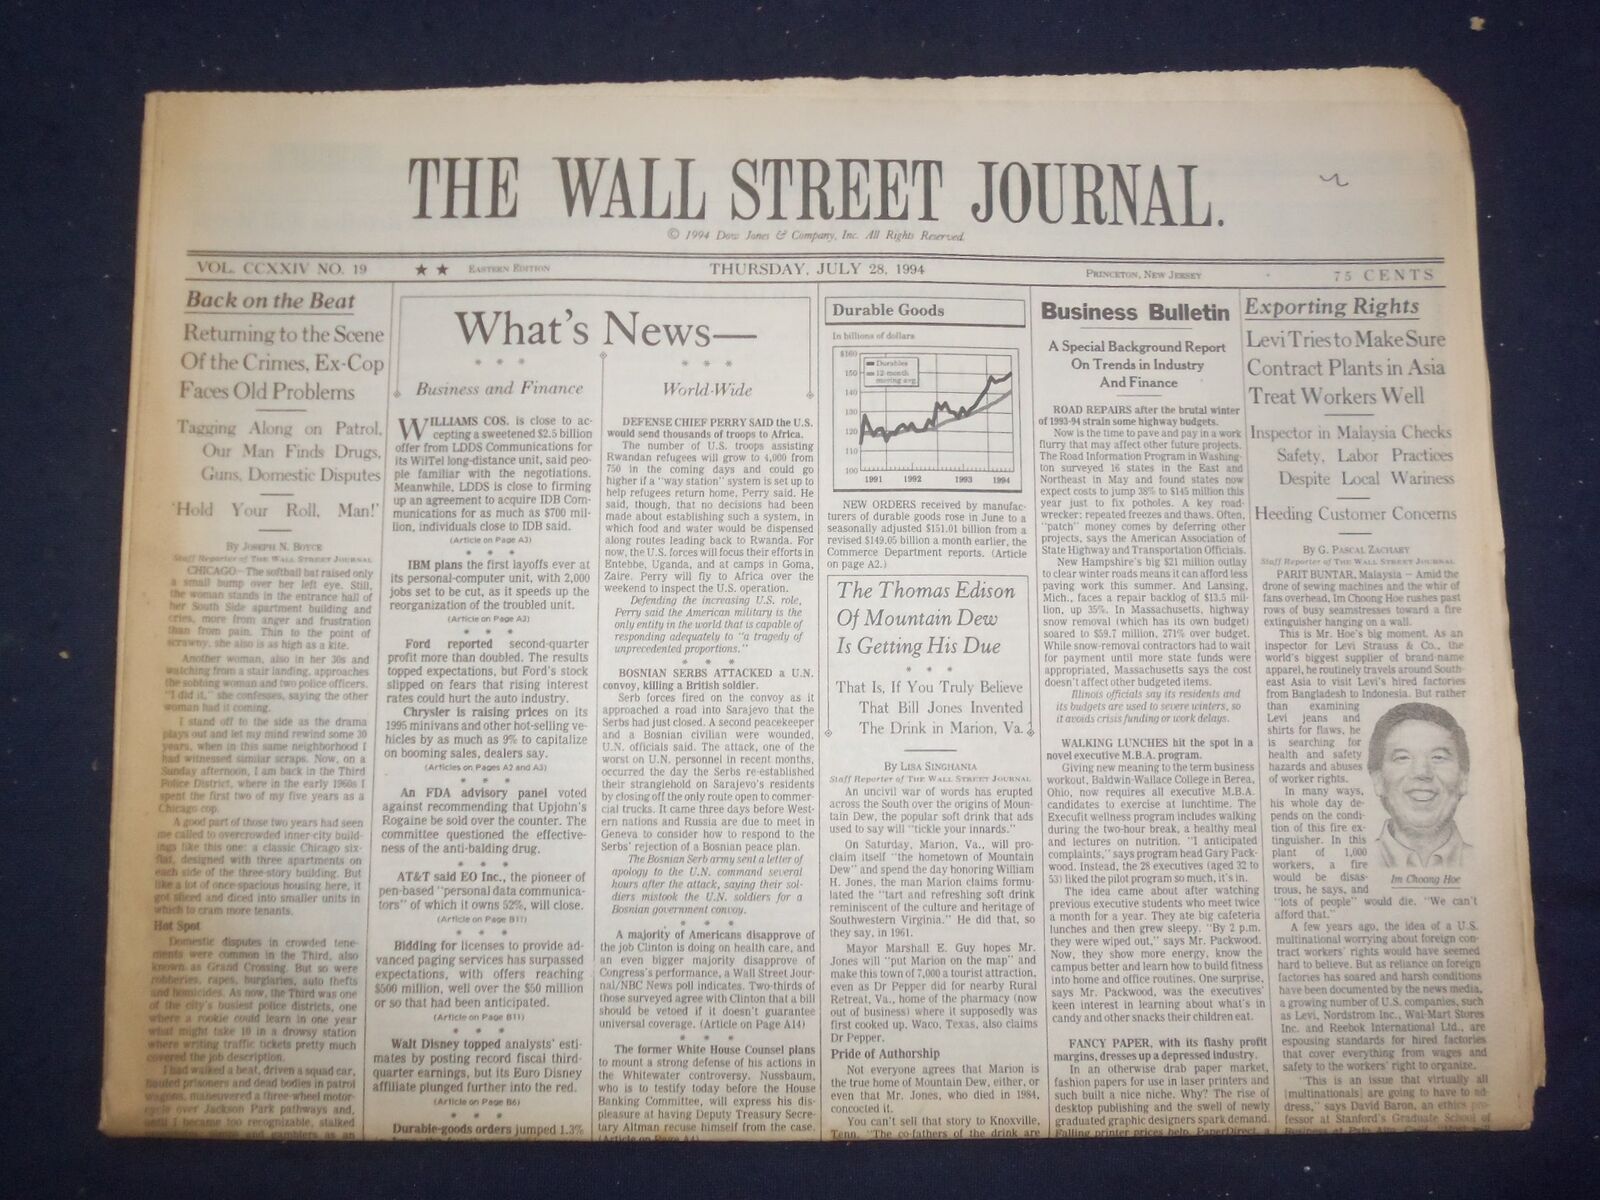 1994 JULY 28 THE WALL STREET JOURNAL -LEVI ASIA PLANTS TO TREAT WORKERS - WJ 388